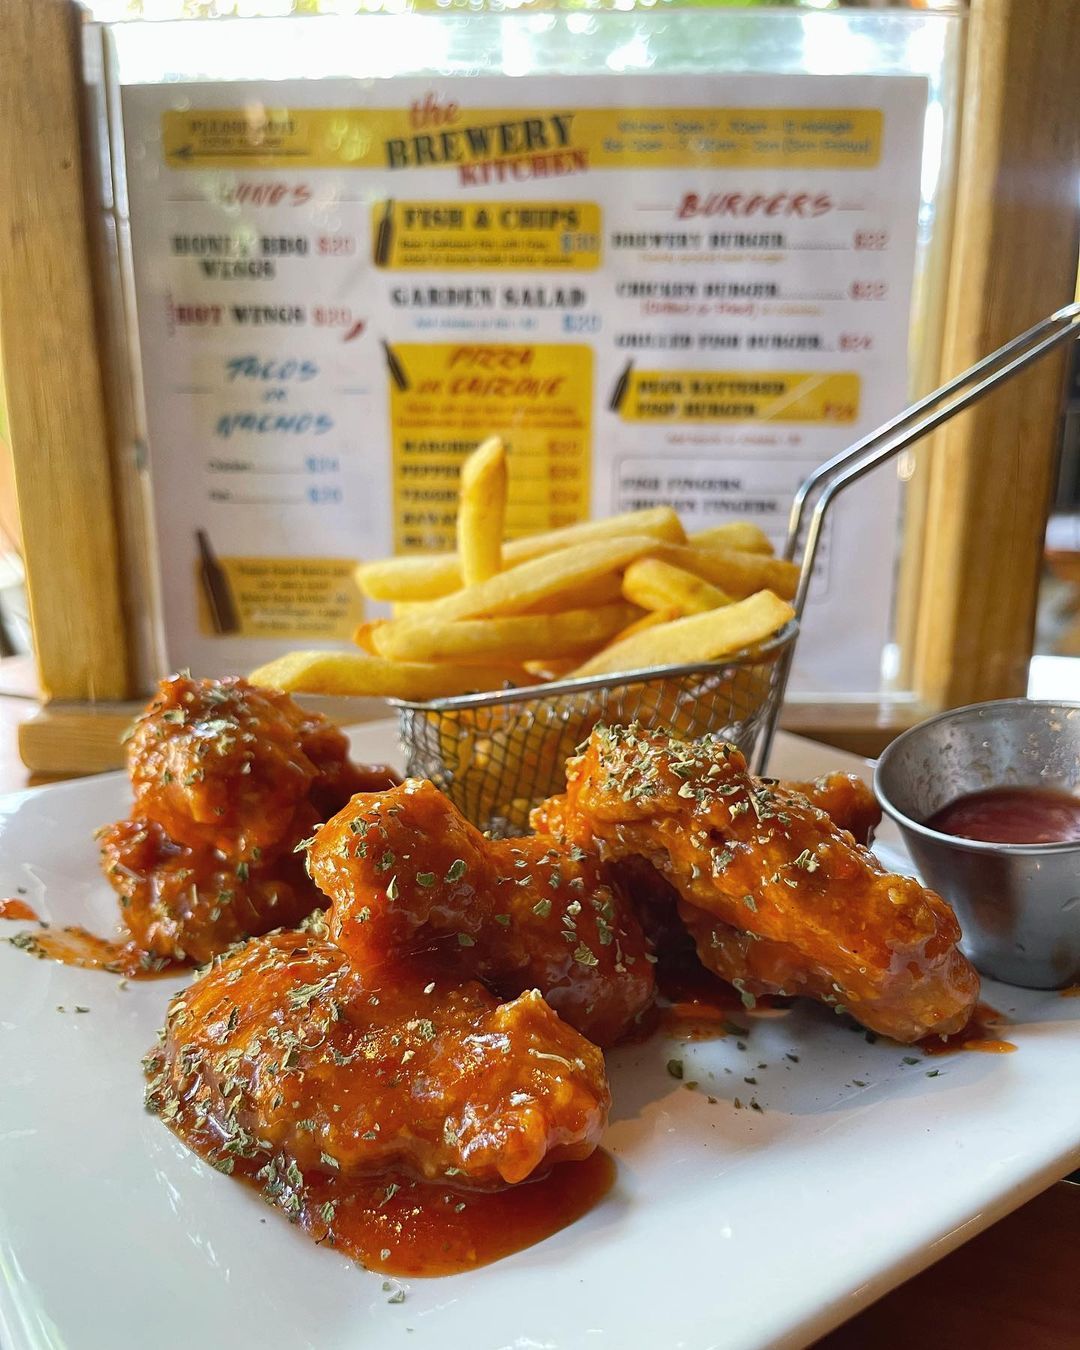 Tried the @westindiesbeer ‘s kitchen for lunch, the hot wings were kicking in a good way. #hotwings🔥 #grenada #puregrenada #freetowonder #islandlife #473 #greenz #caribbean #followgrenada (at The...